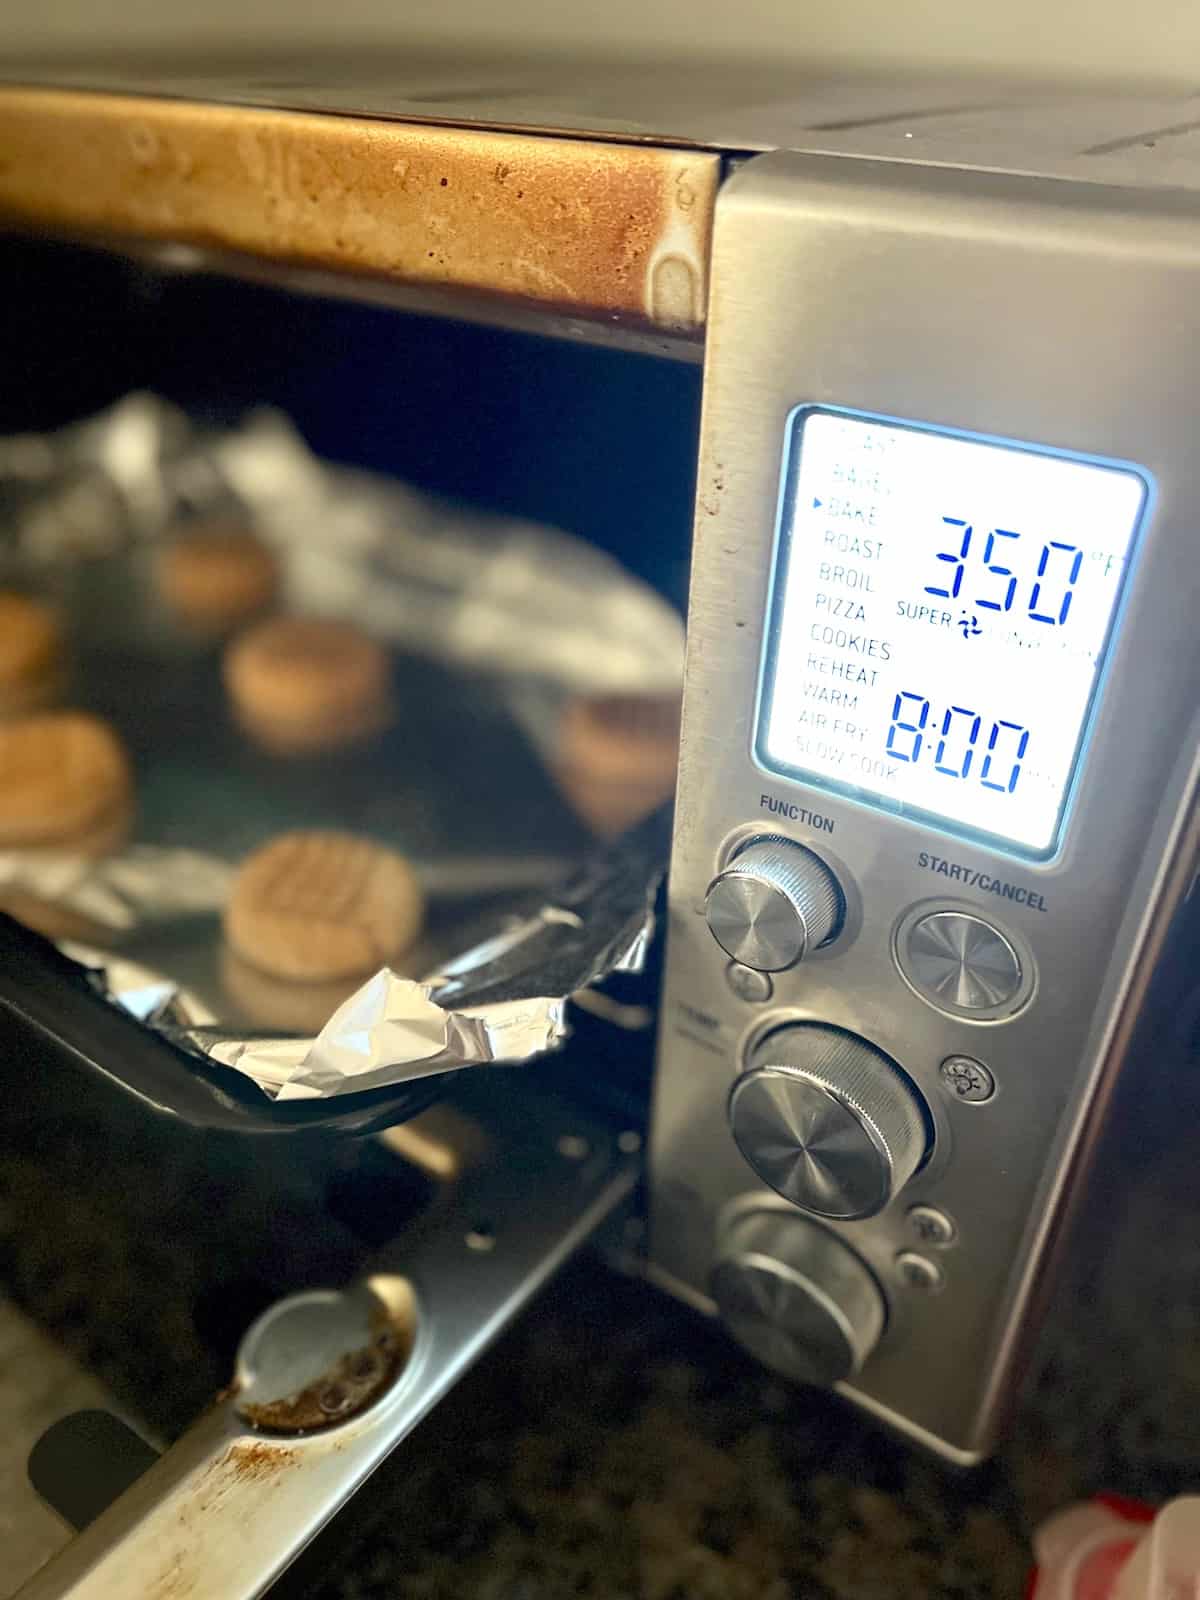 Tray of cookies in toaster oven with time and temp set.